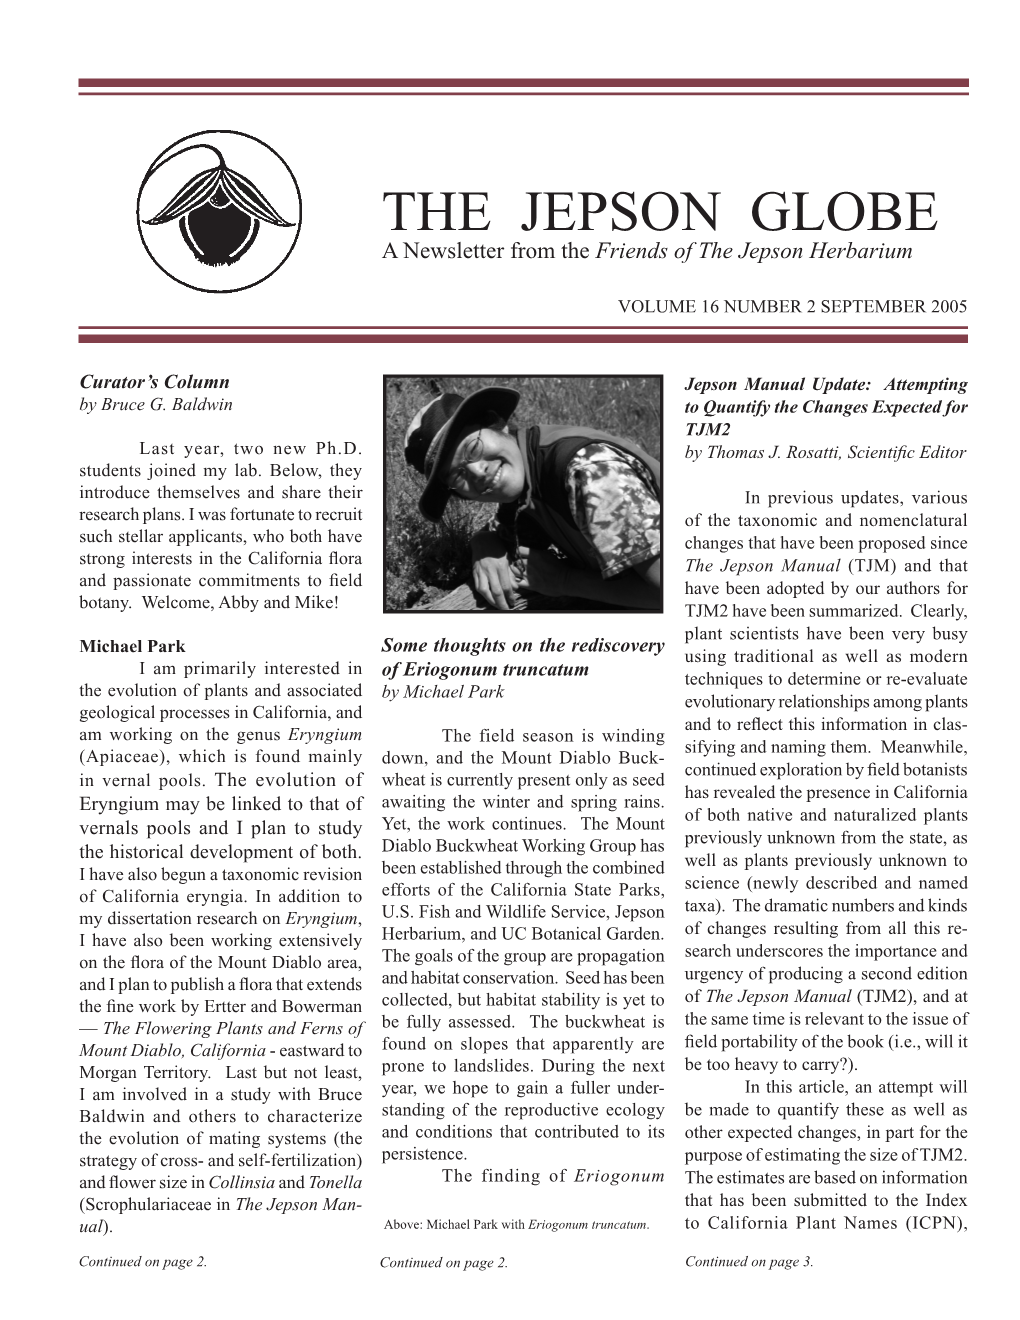 THE JEPSON GLOBE a Newsletter from the Friends of the Jepson Herbarium